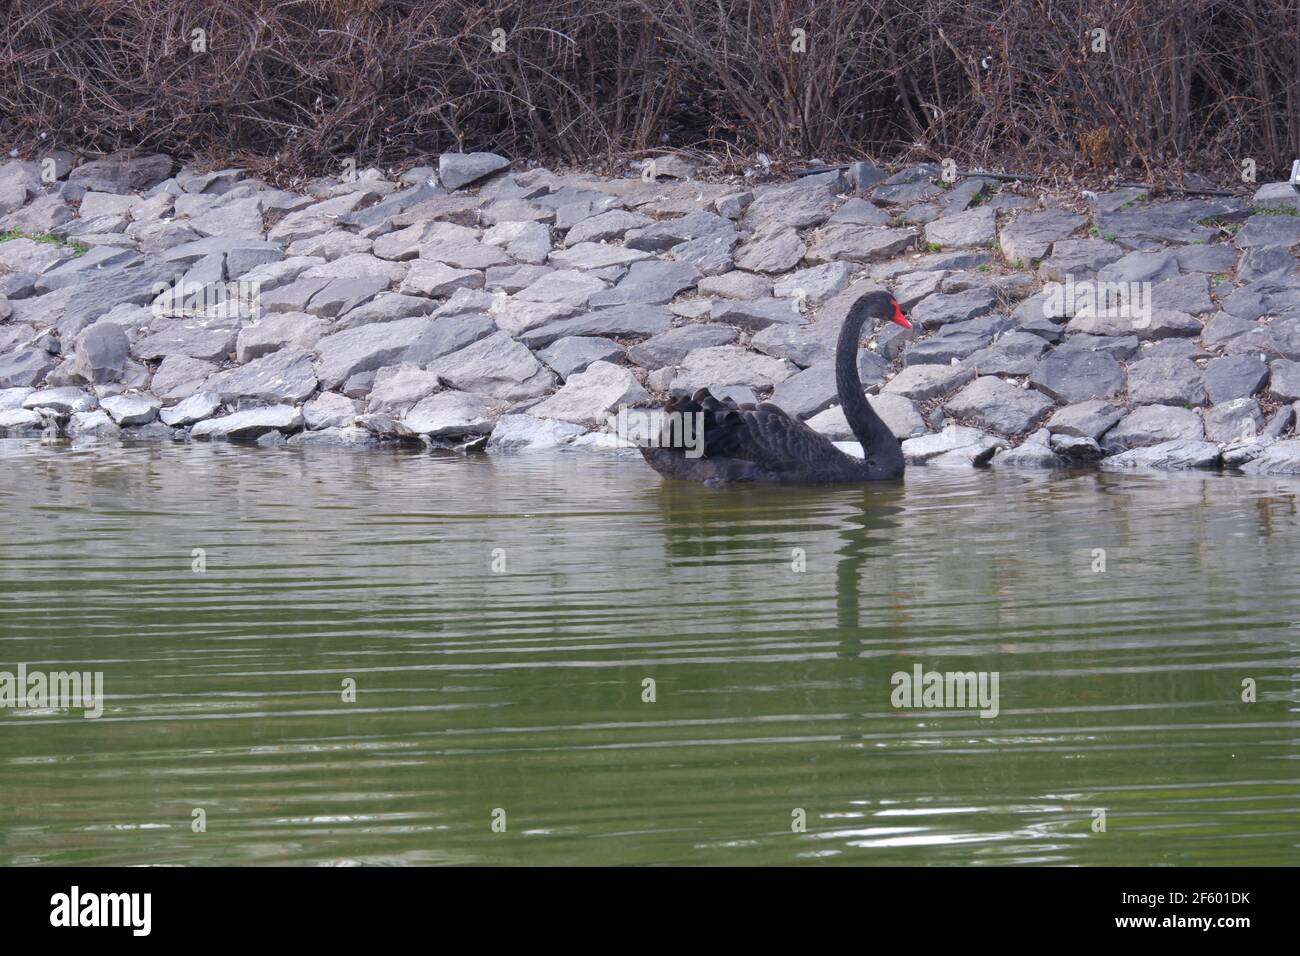 Ledsager Memo Lull Page 4 - Valentine And Swan High Resolution Stock Photography and Images -  Alamy